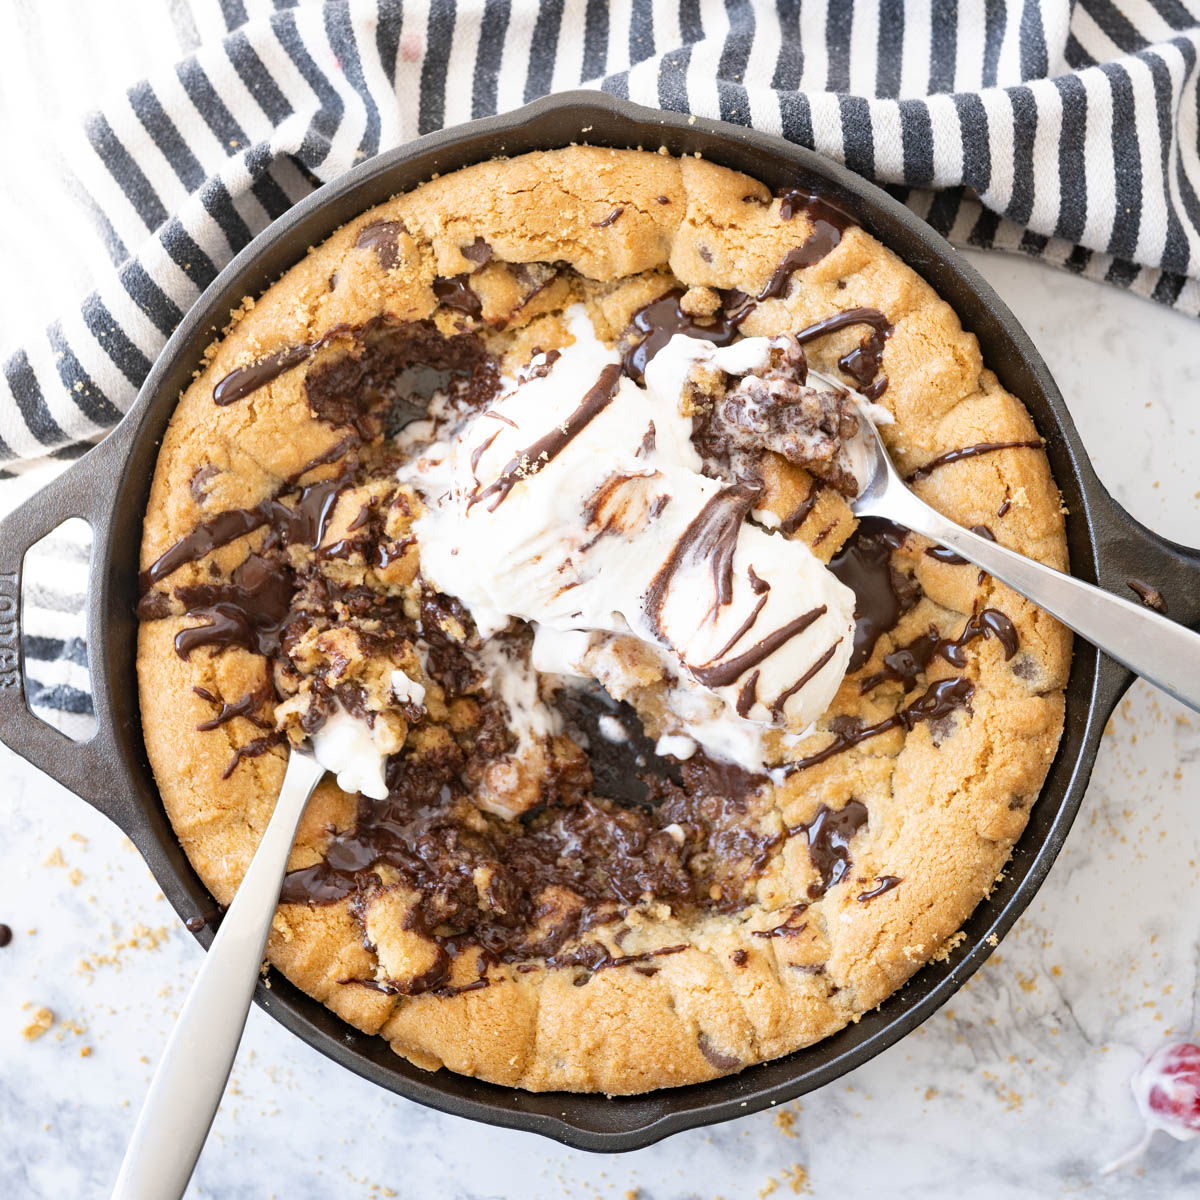 How to make a Pizookie